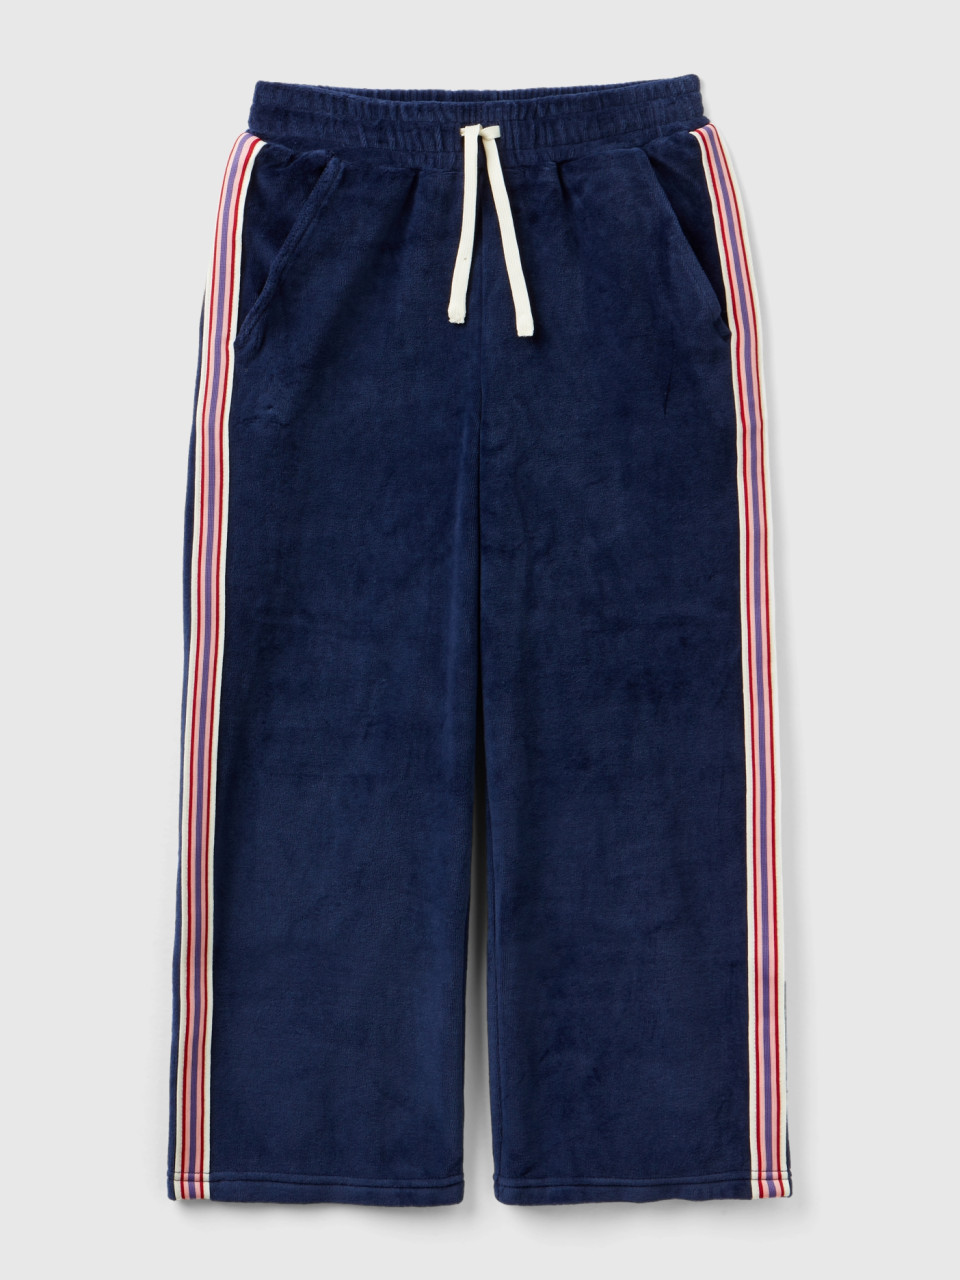 Benetton, Chenille Trousers With Striped Bands, Dark Blue, Kids